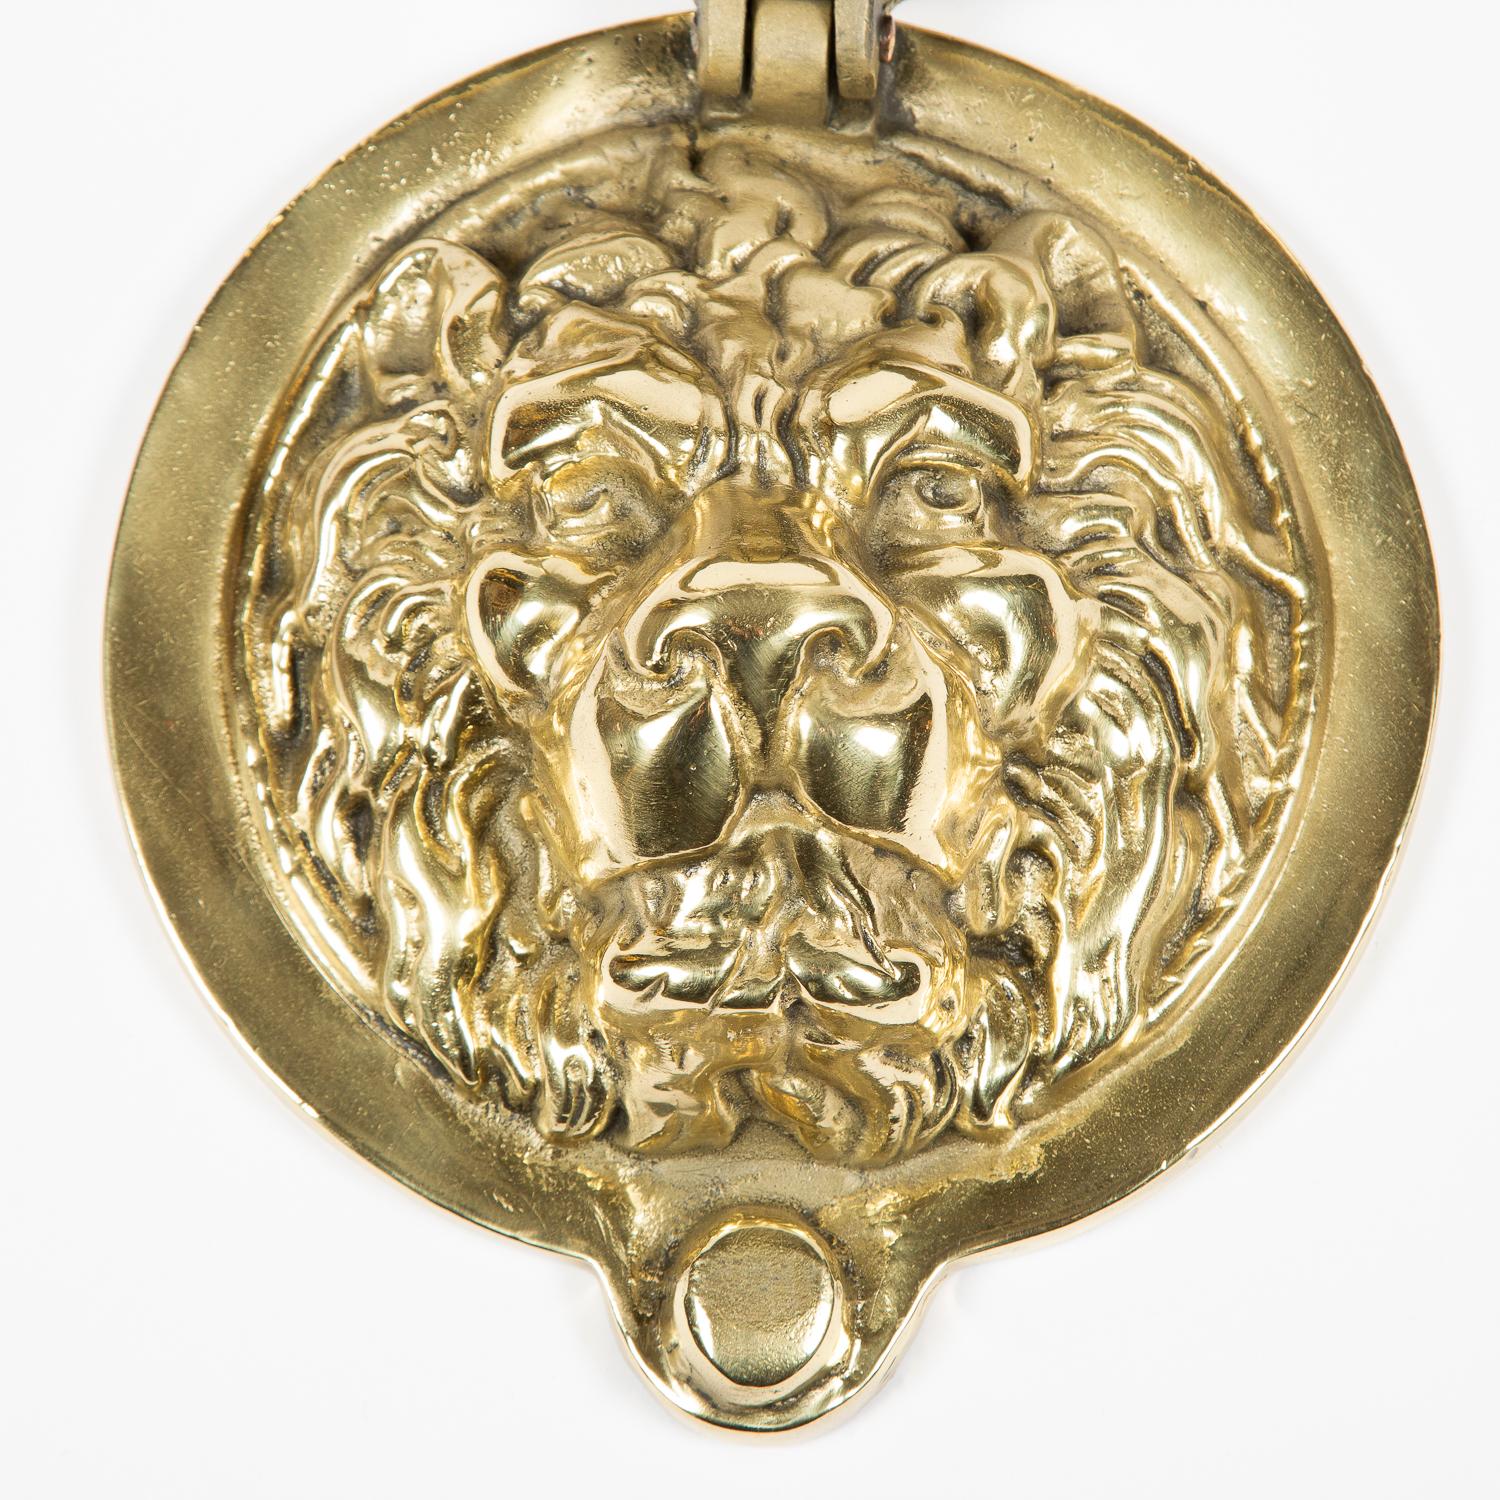 A large brass Lion's head door knocker.

Supplied with two new bolts to attach to door.

Weight: 8.6 lbs